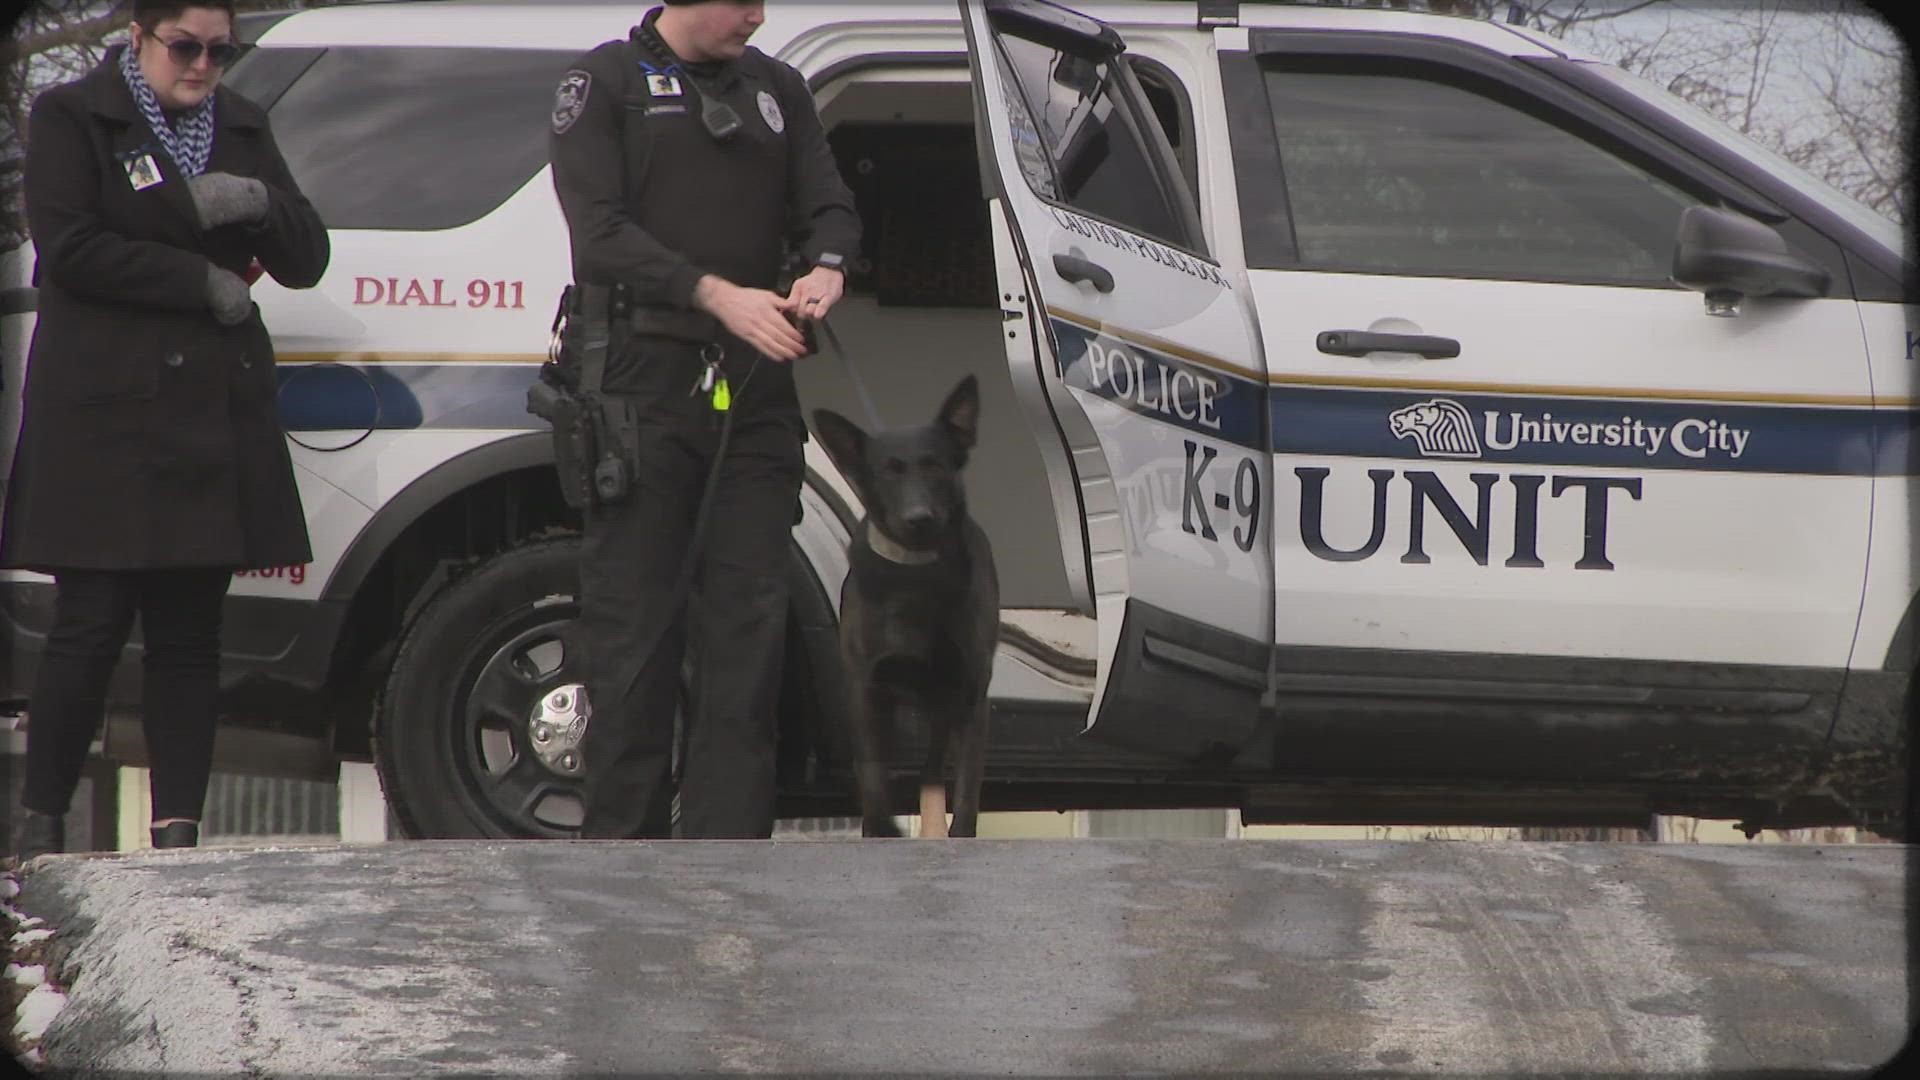 Due to medical issues, K-9 officer King is being humanly euthanized. The department is gathering to say a final goodbye.